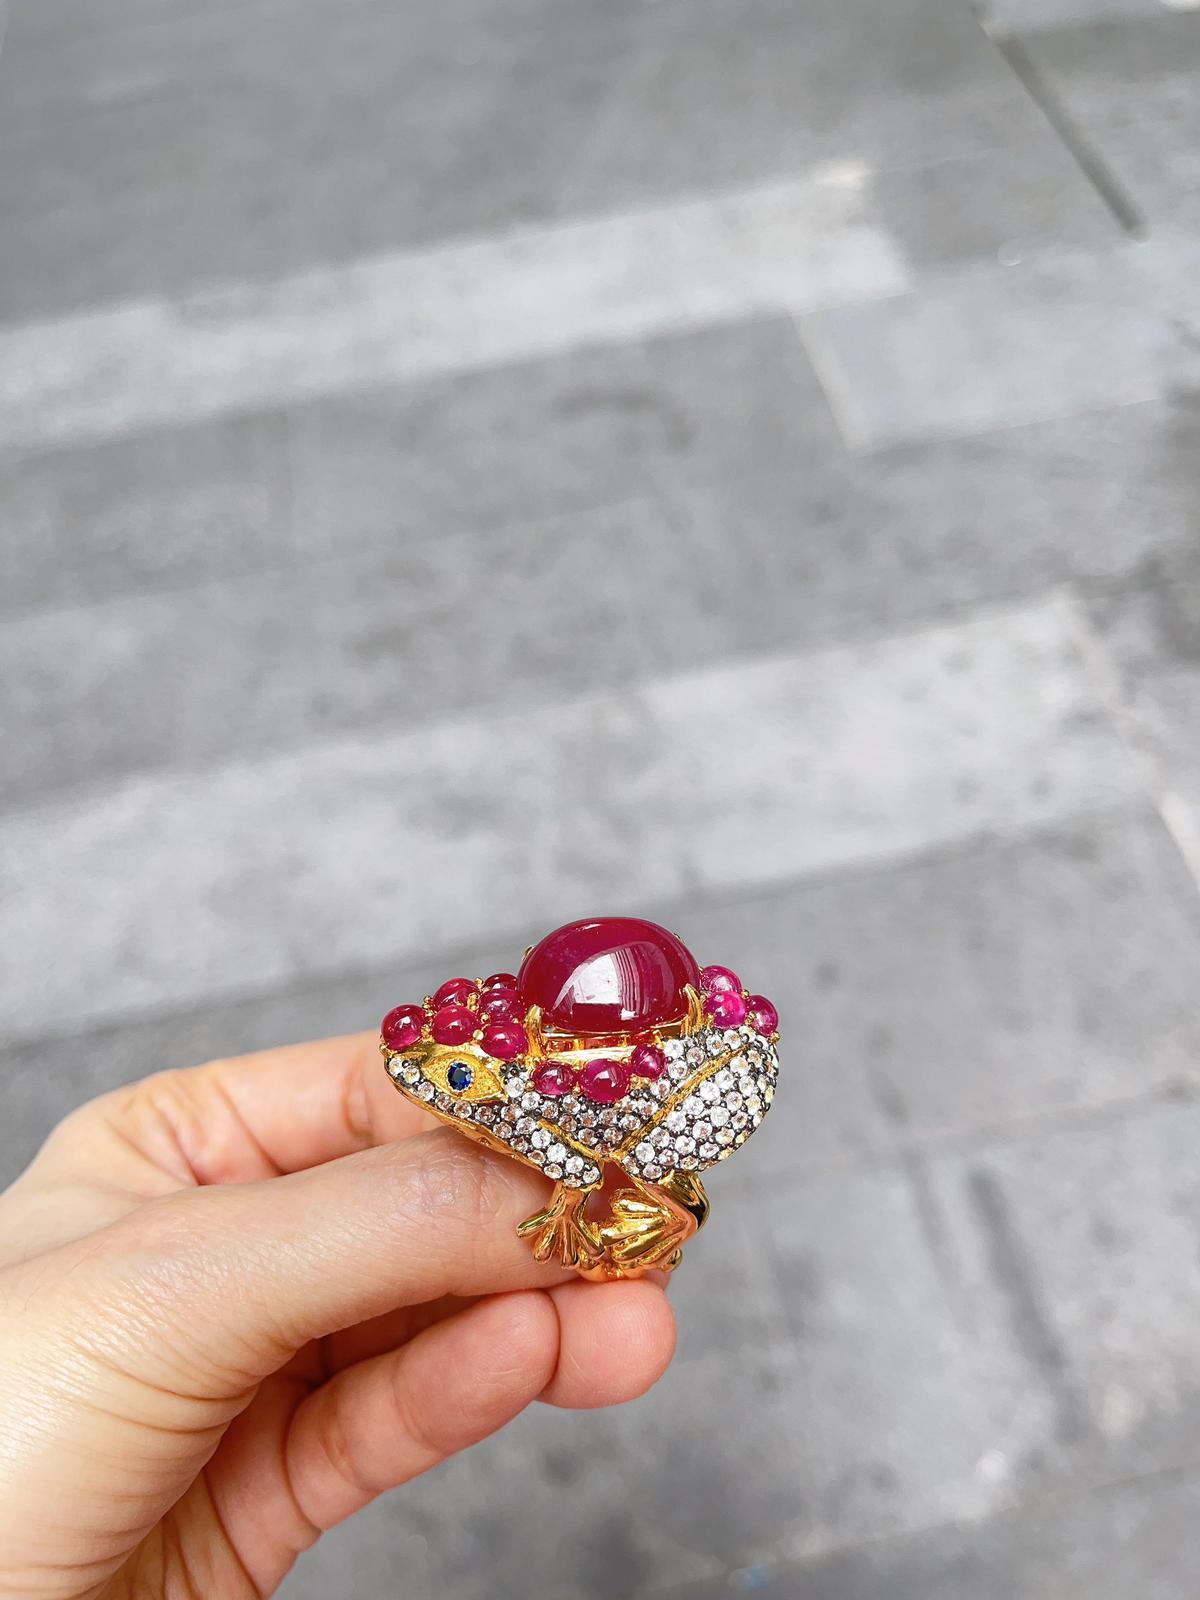 “Orient” Red Ruby & White Topaz Cocktail Ring Set in 22k Gold & Silver In New Condition For Sale In New York, NY